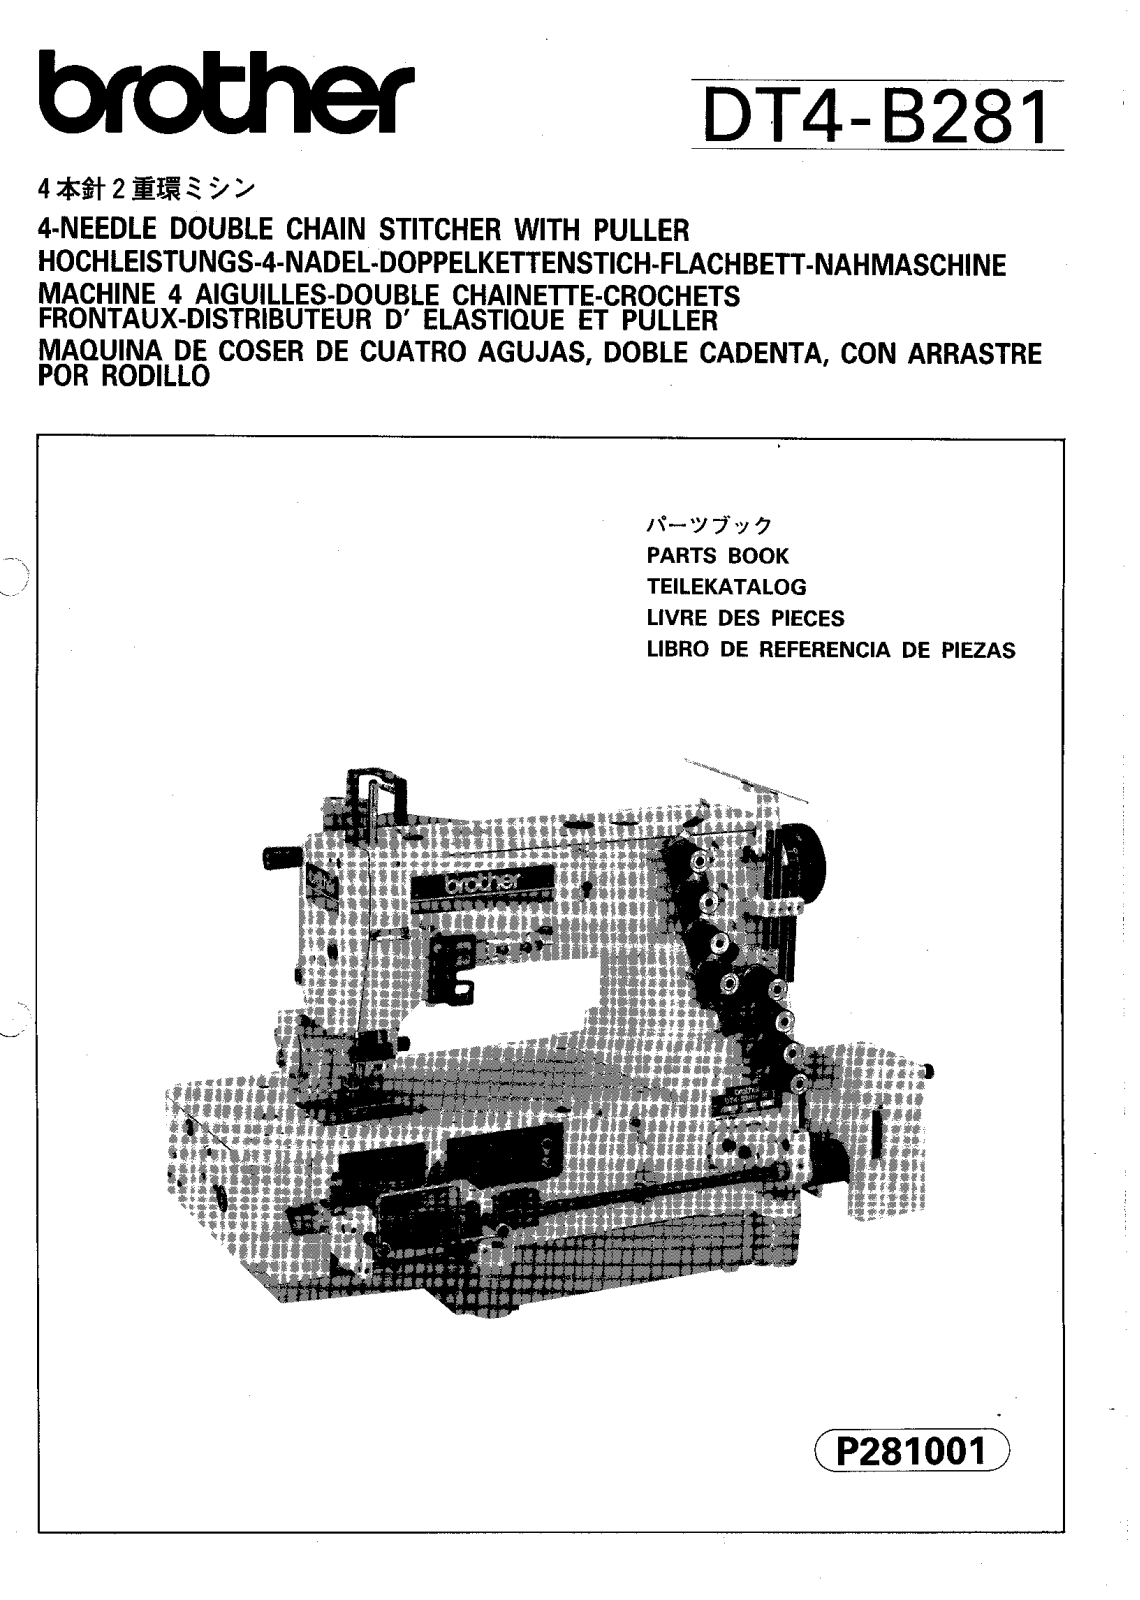 Brother DT4-B281 Parts List